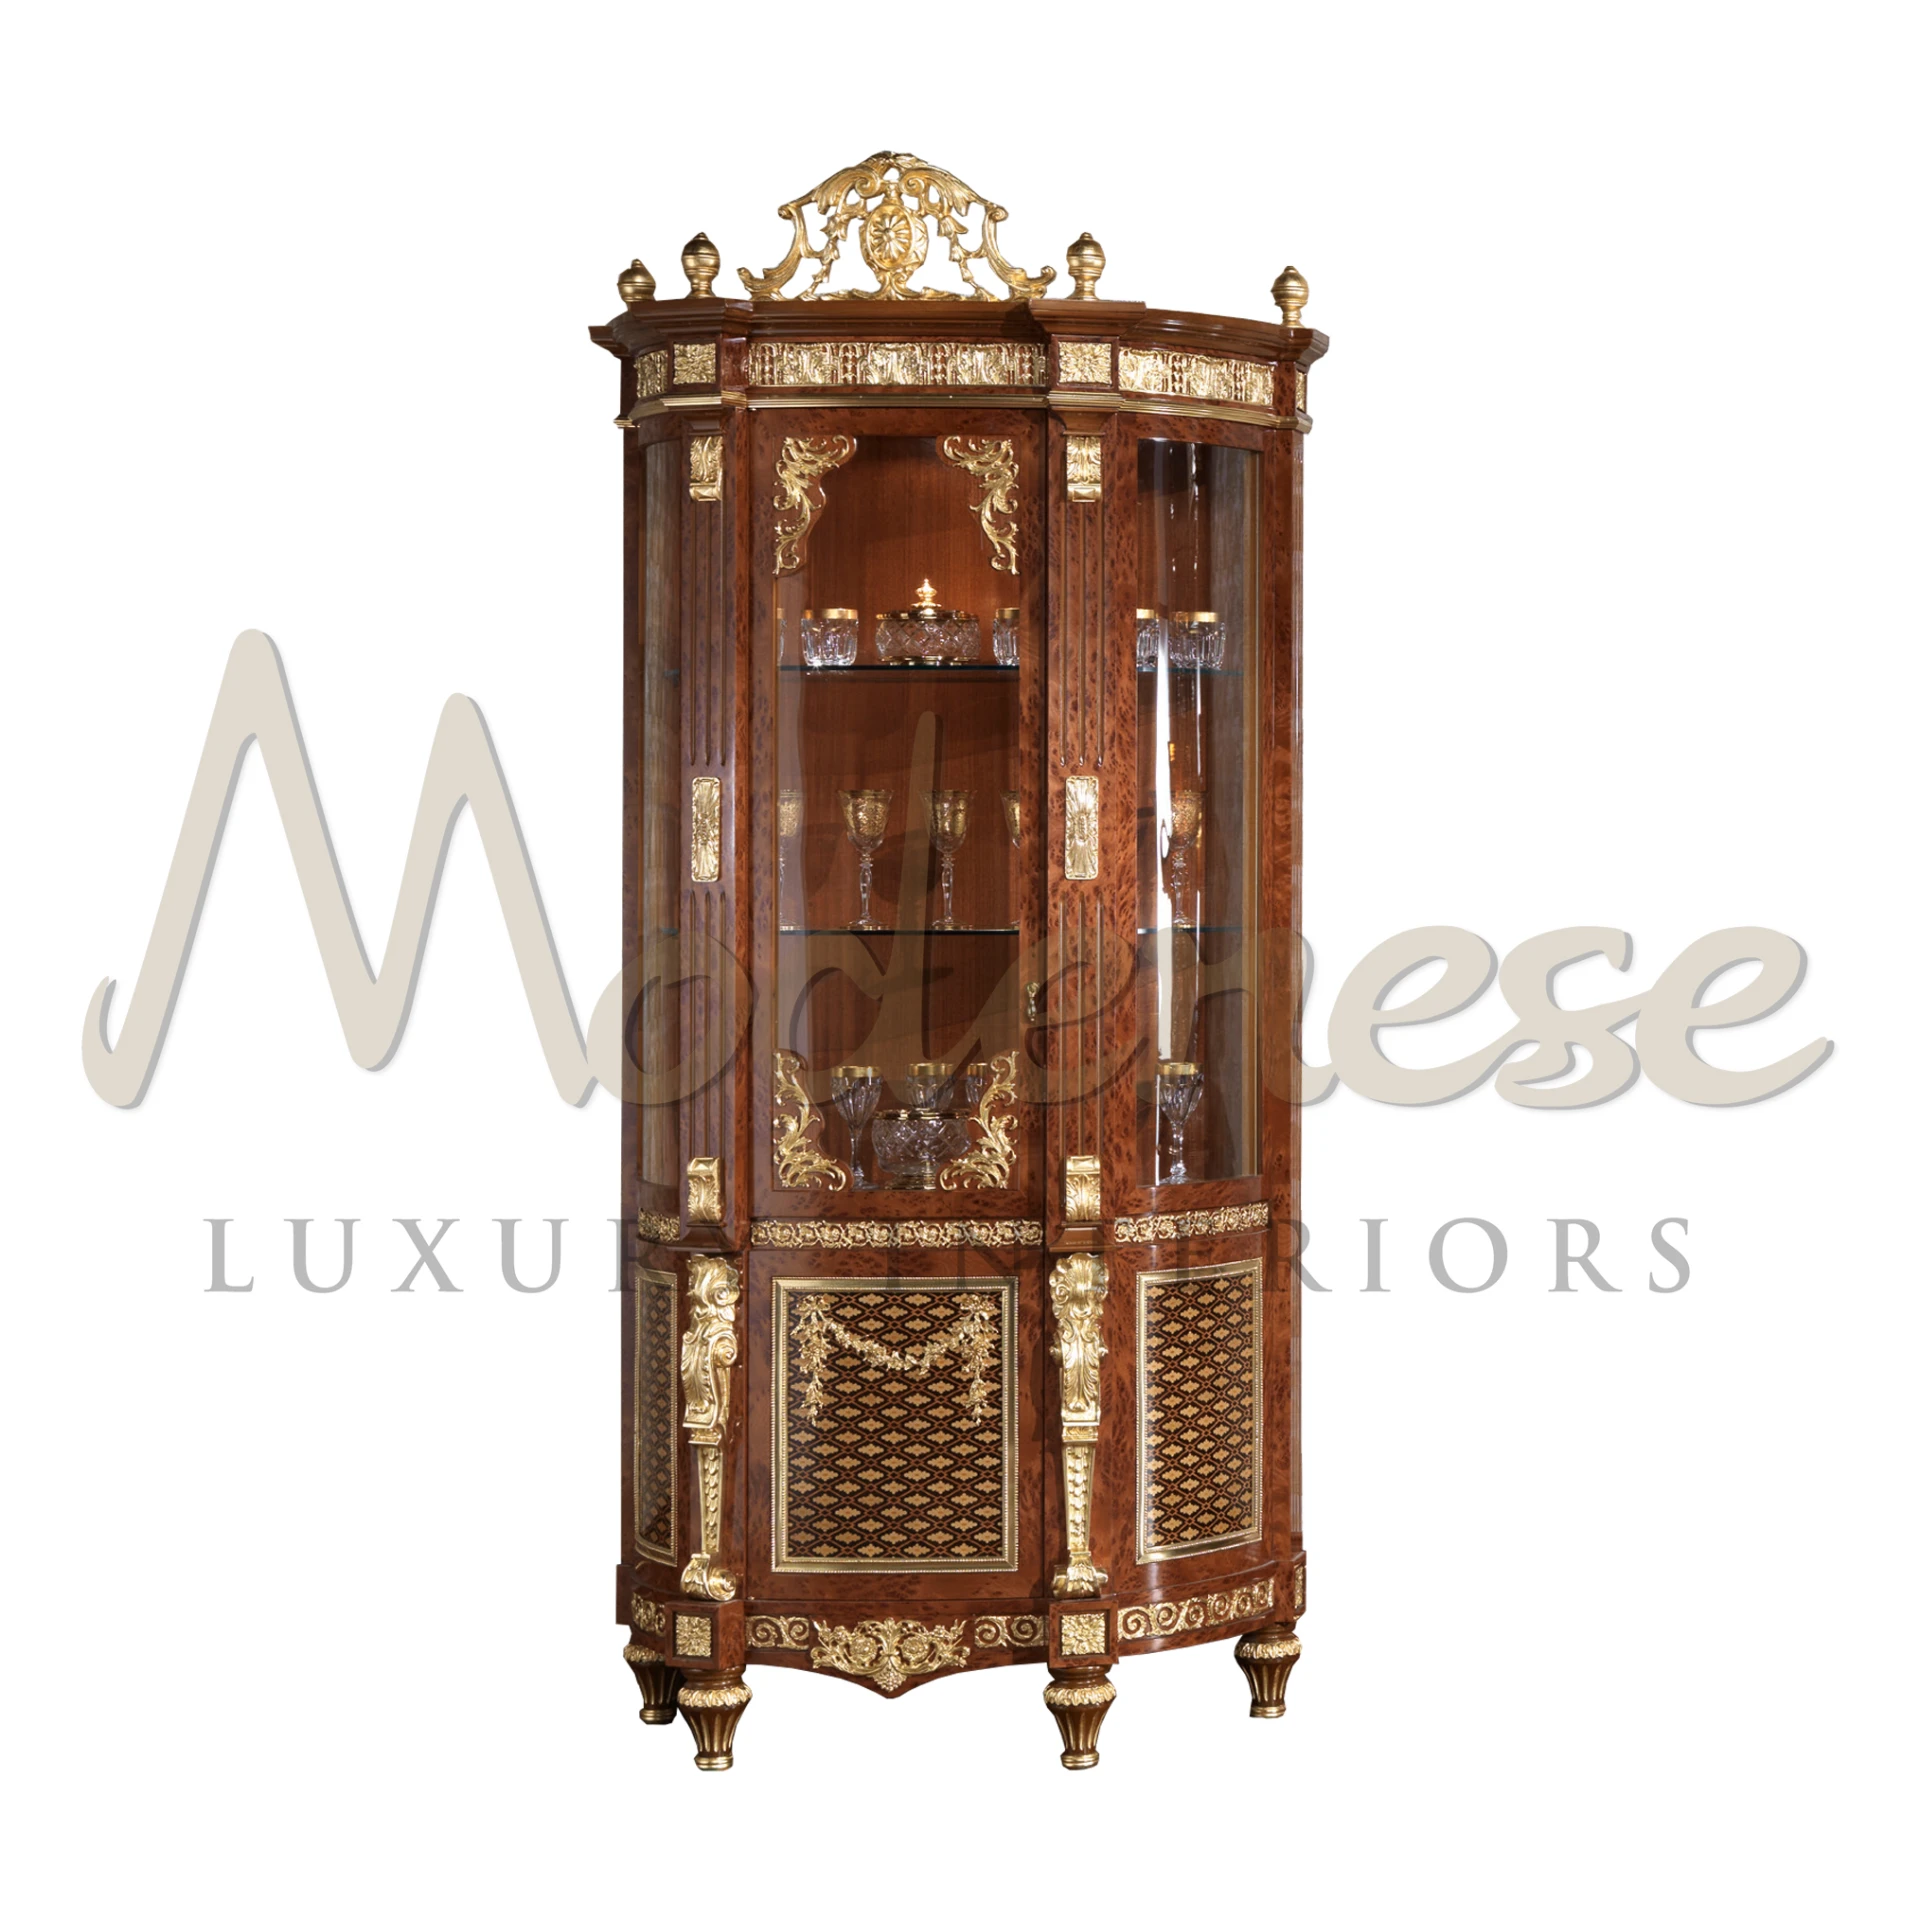 Discover a masterpiece from Modenese Furniture—a vitrine crafted with solid wood, marqueteries, and exquisite gold leaf details.